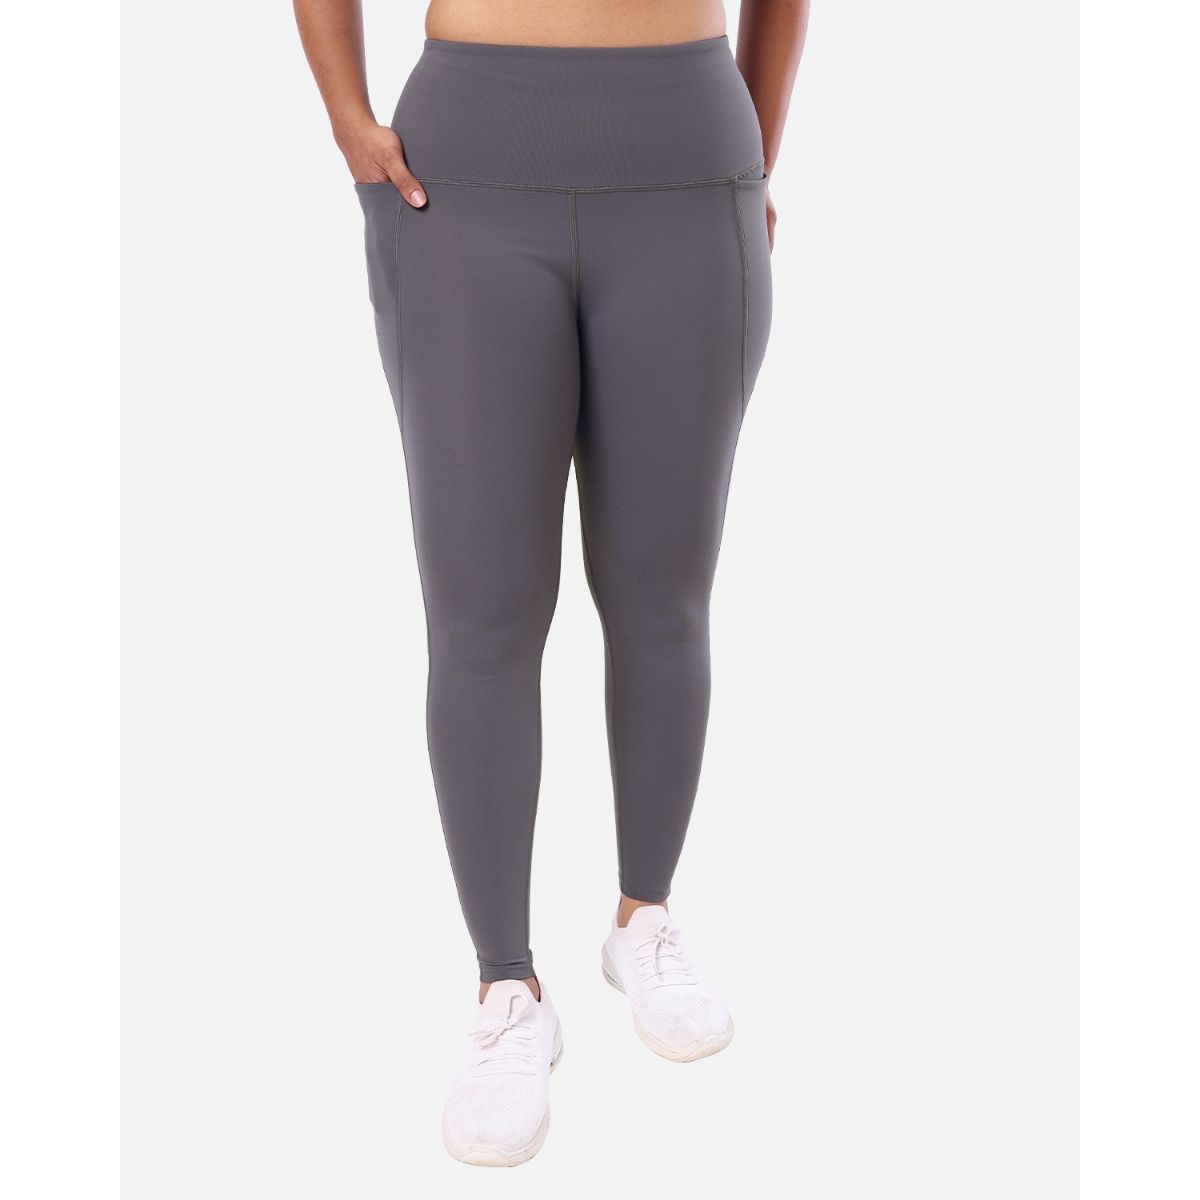 BlissClub WomenThe Ultimate Capris | 3/4th Length Pants| Super- High Waist|  2 Pockets| Wide Waistband| Activewear for Women : Amazon.in: Fashion